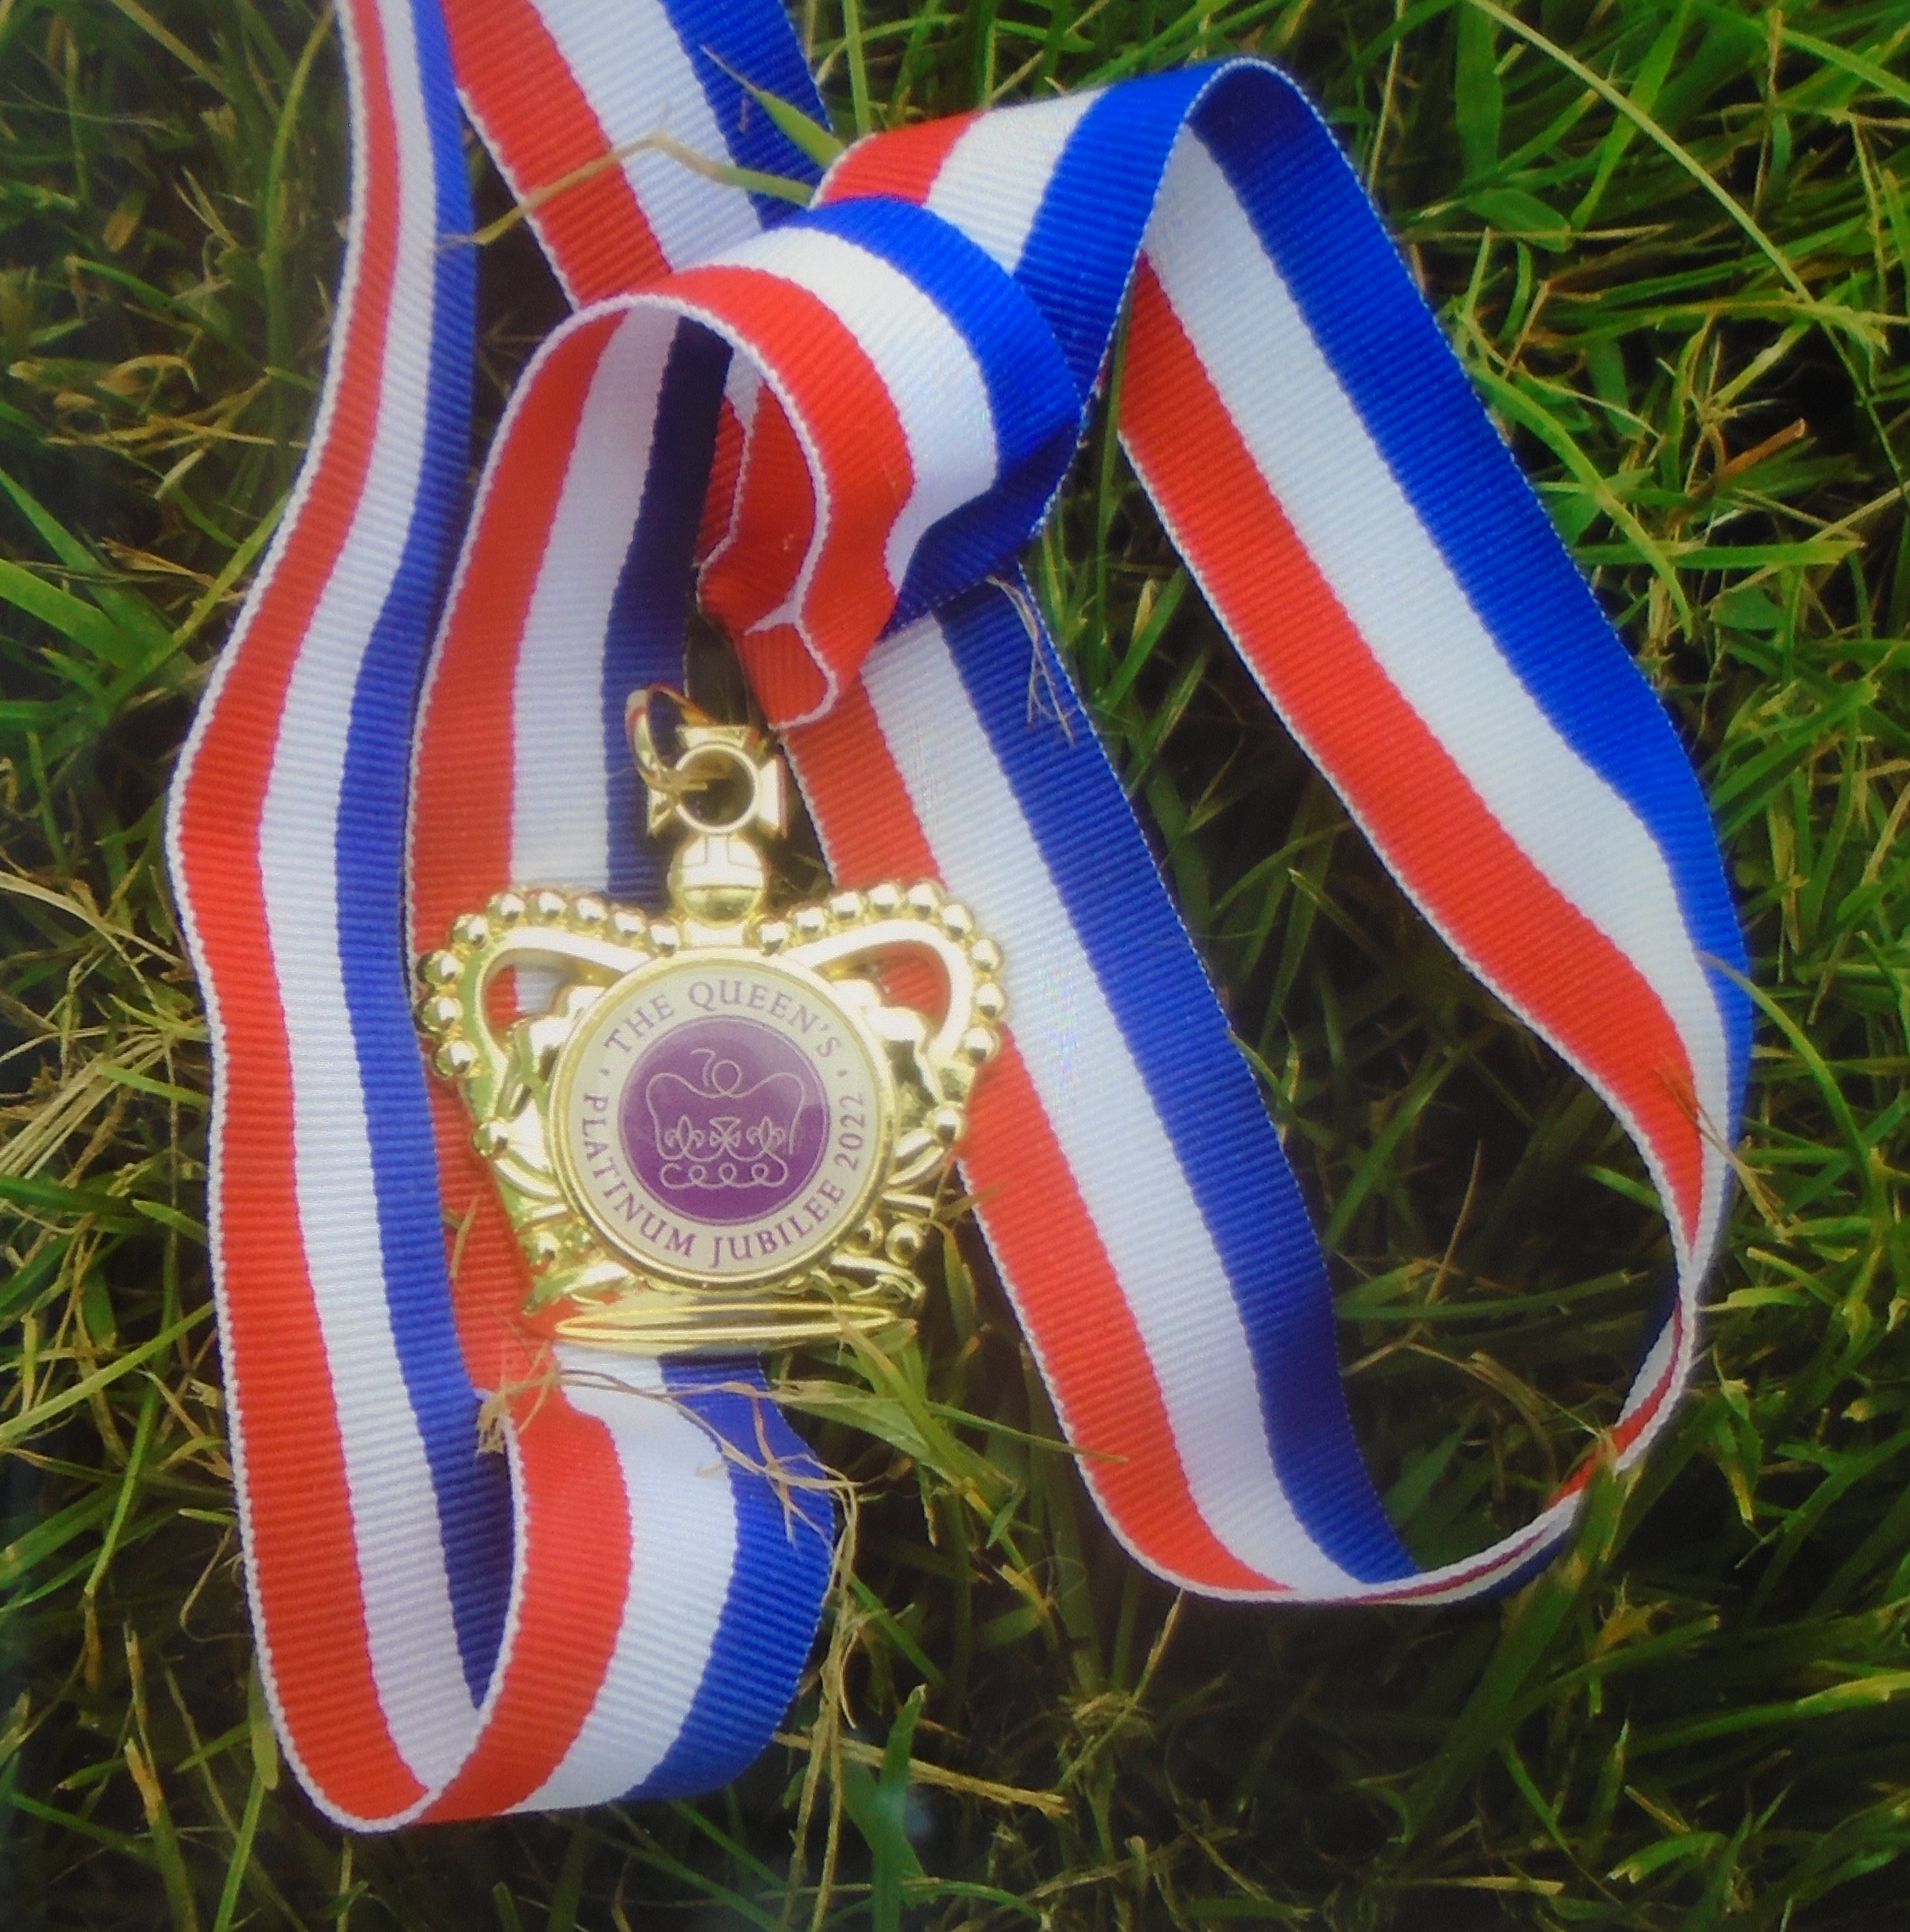 Q70 Willersey Race medal